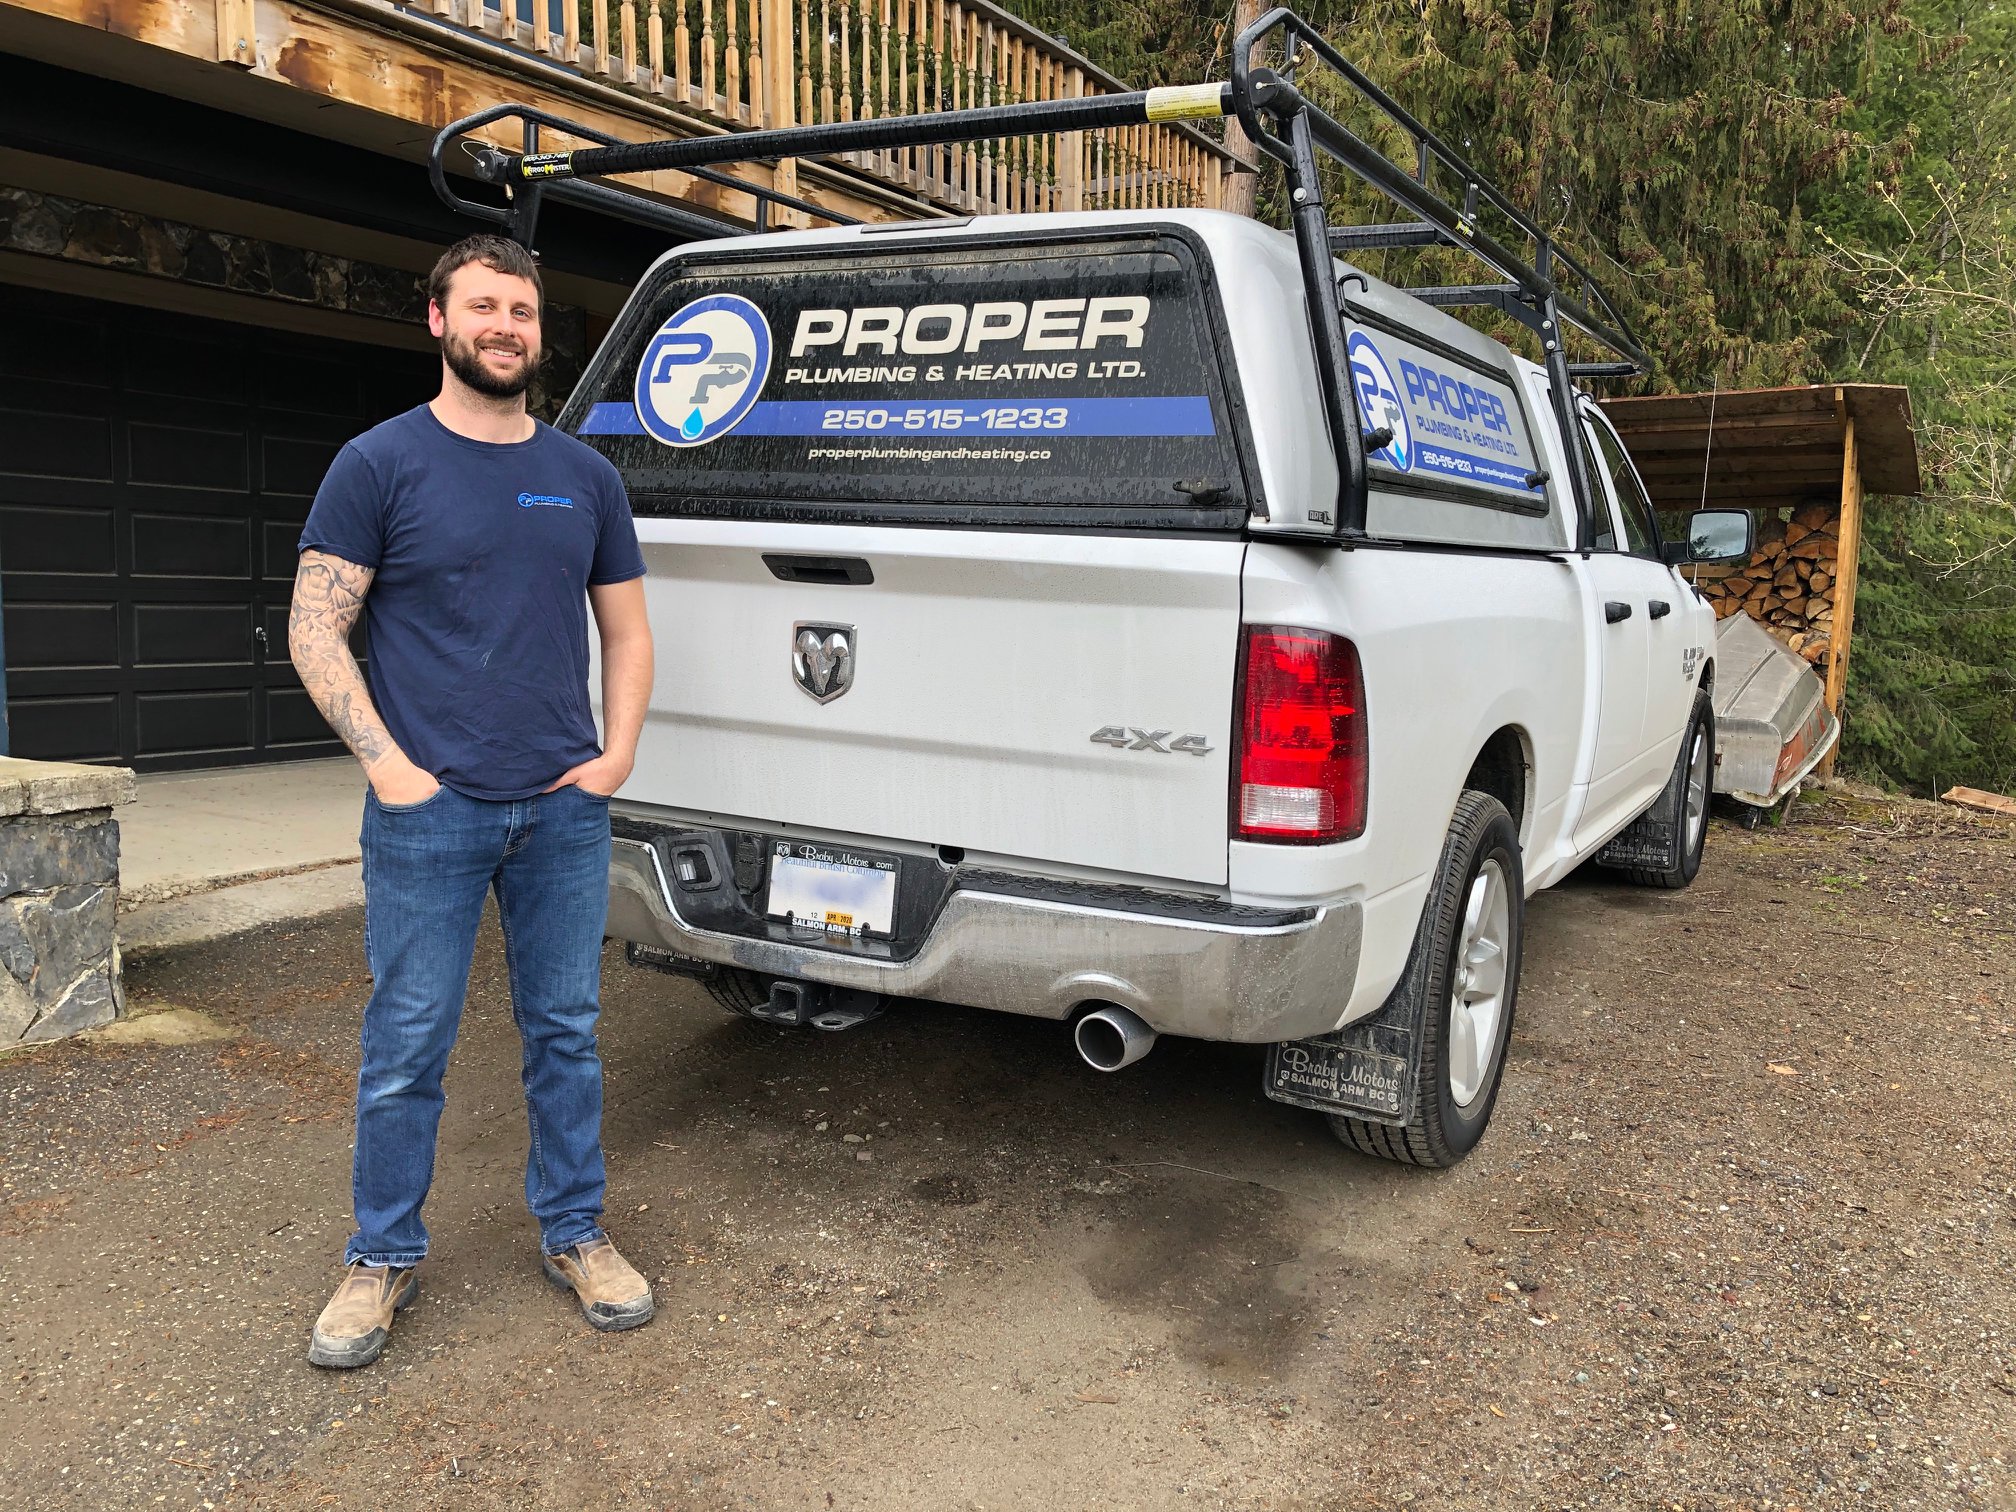 Proper Plumbing and Heating Ltd.: Proper Plumbing and Heating Ltd. provides plumbing and gas fitting installations and repairs for Shuswap homes and businesses. Our number one priority is to earn and keep our clients’ trust, […]